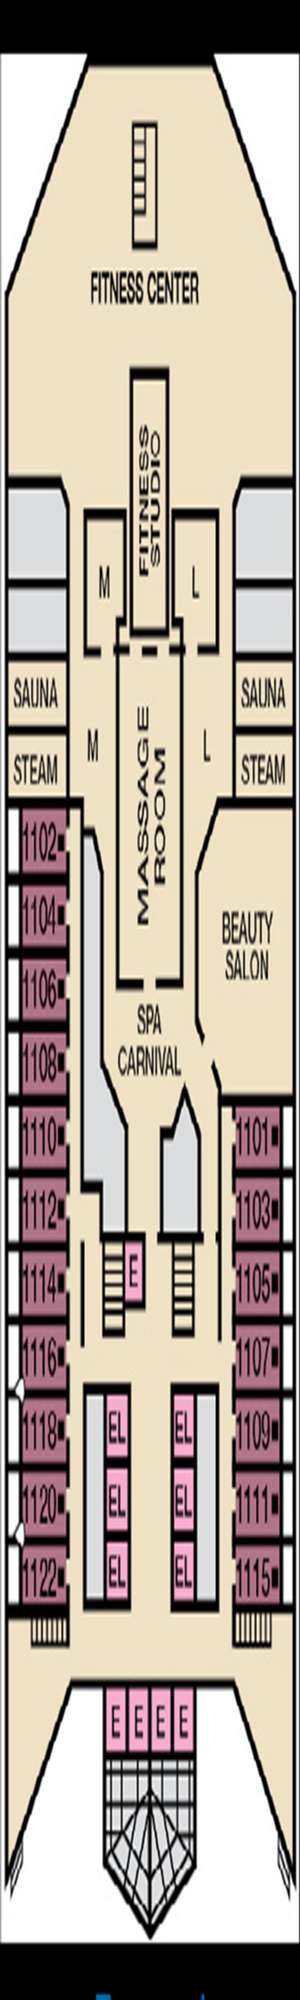 Deck plan for Carnival Liberty